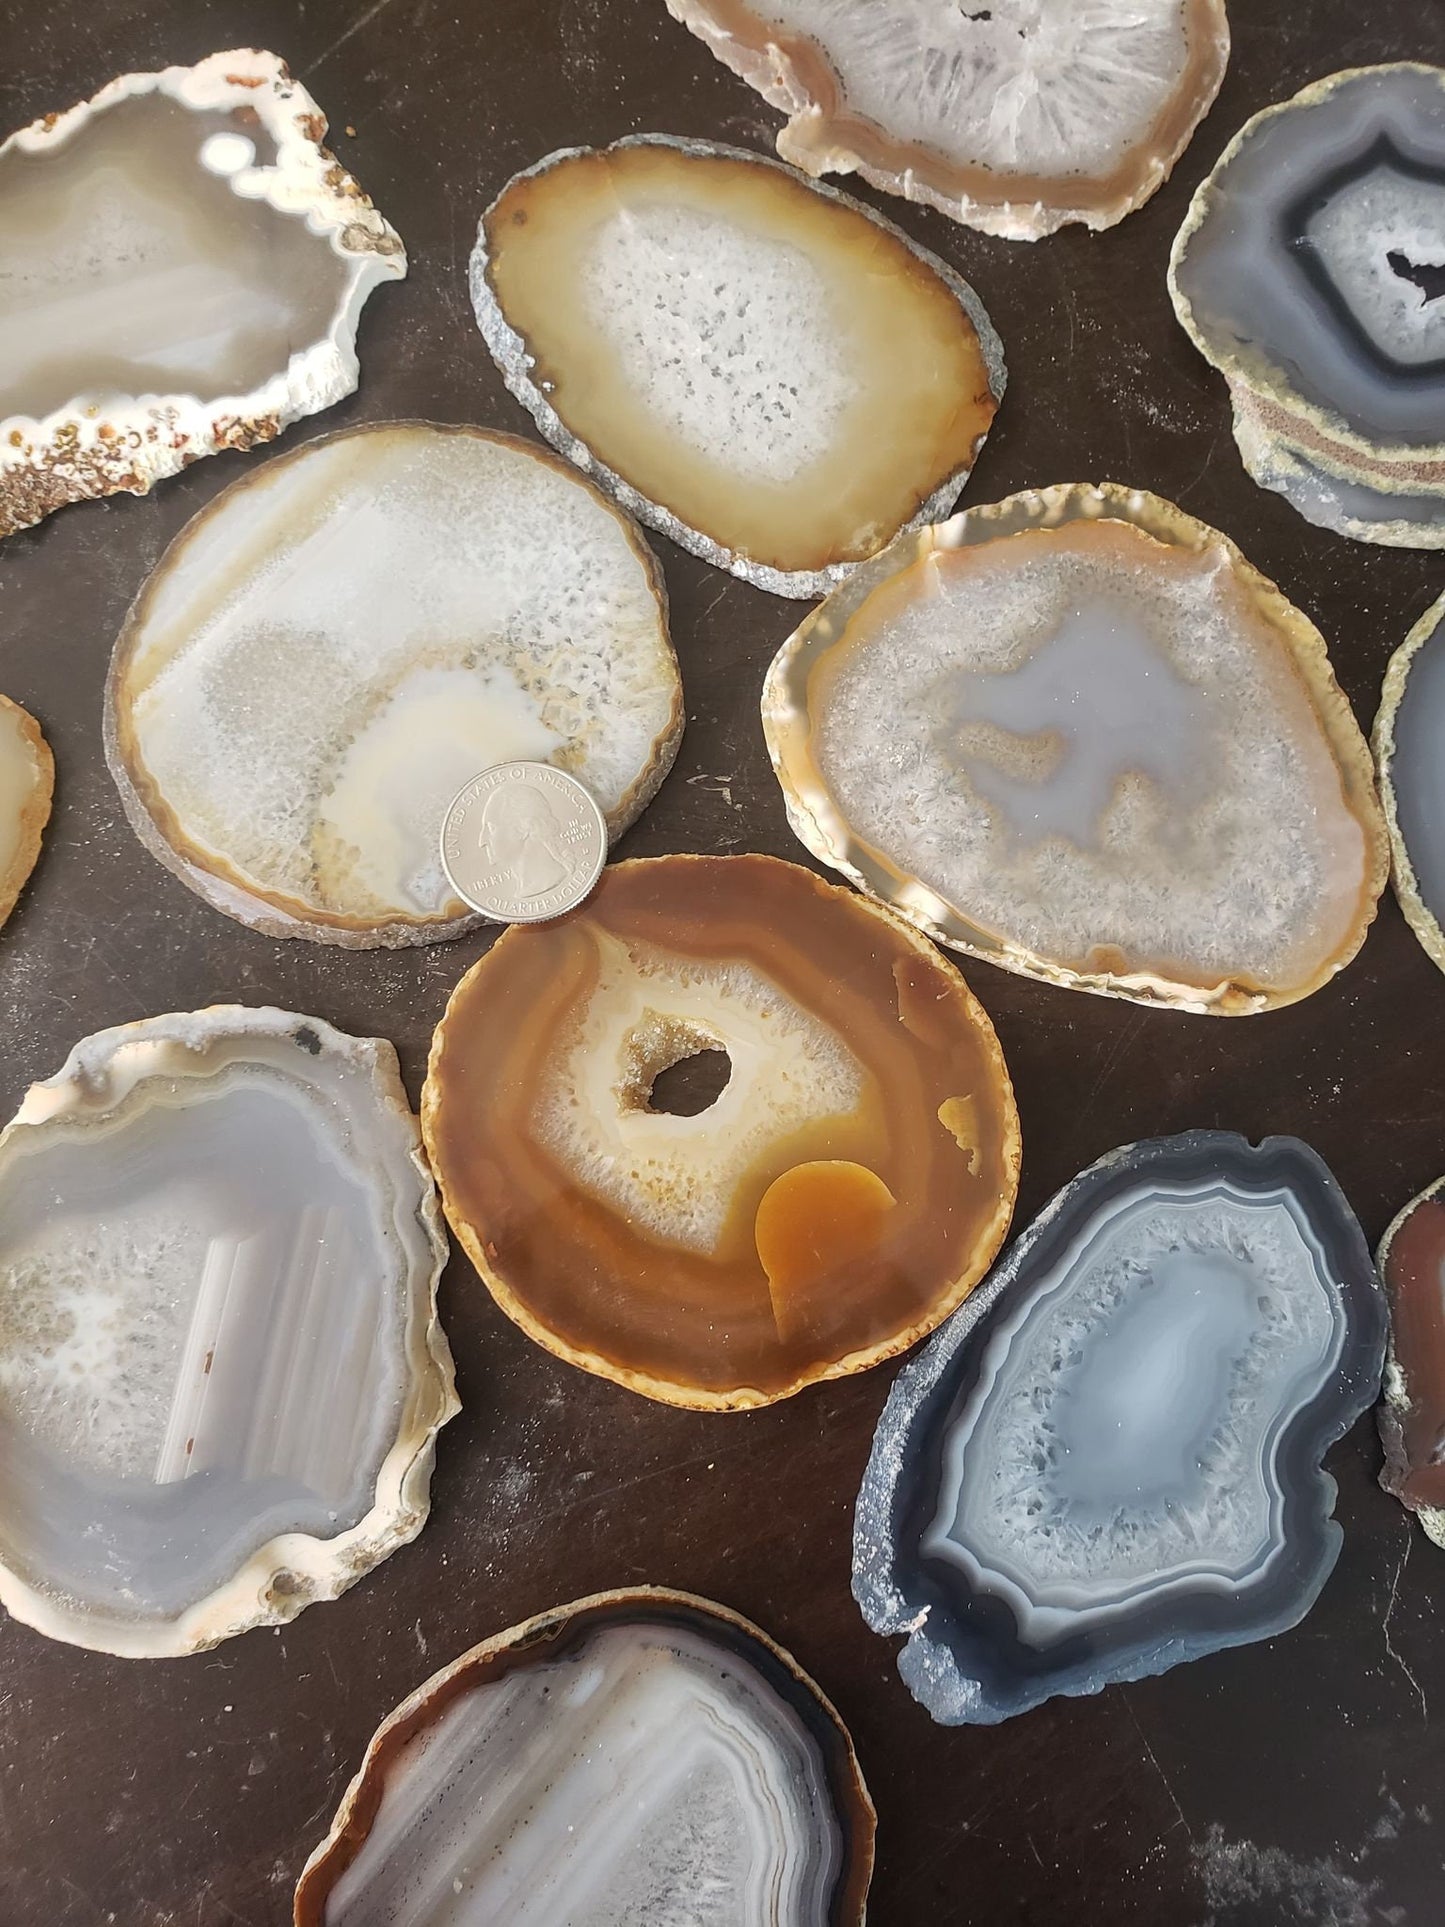 Agate Slice, Polished (Approx. 2 1/2" - 3 1/2") 0239